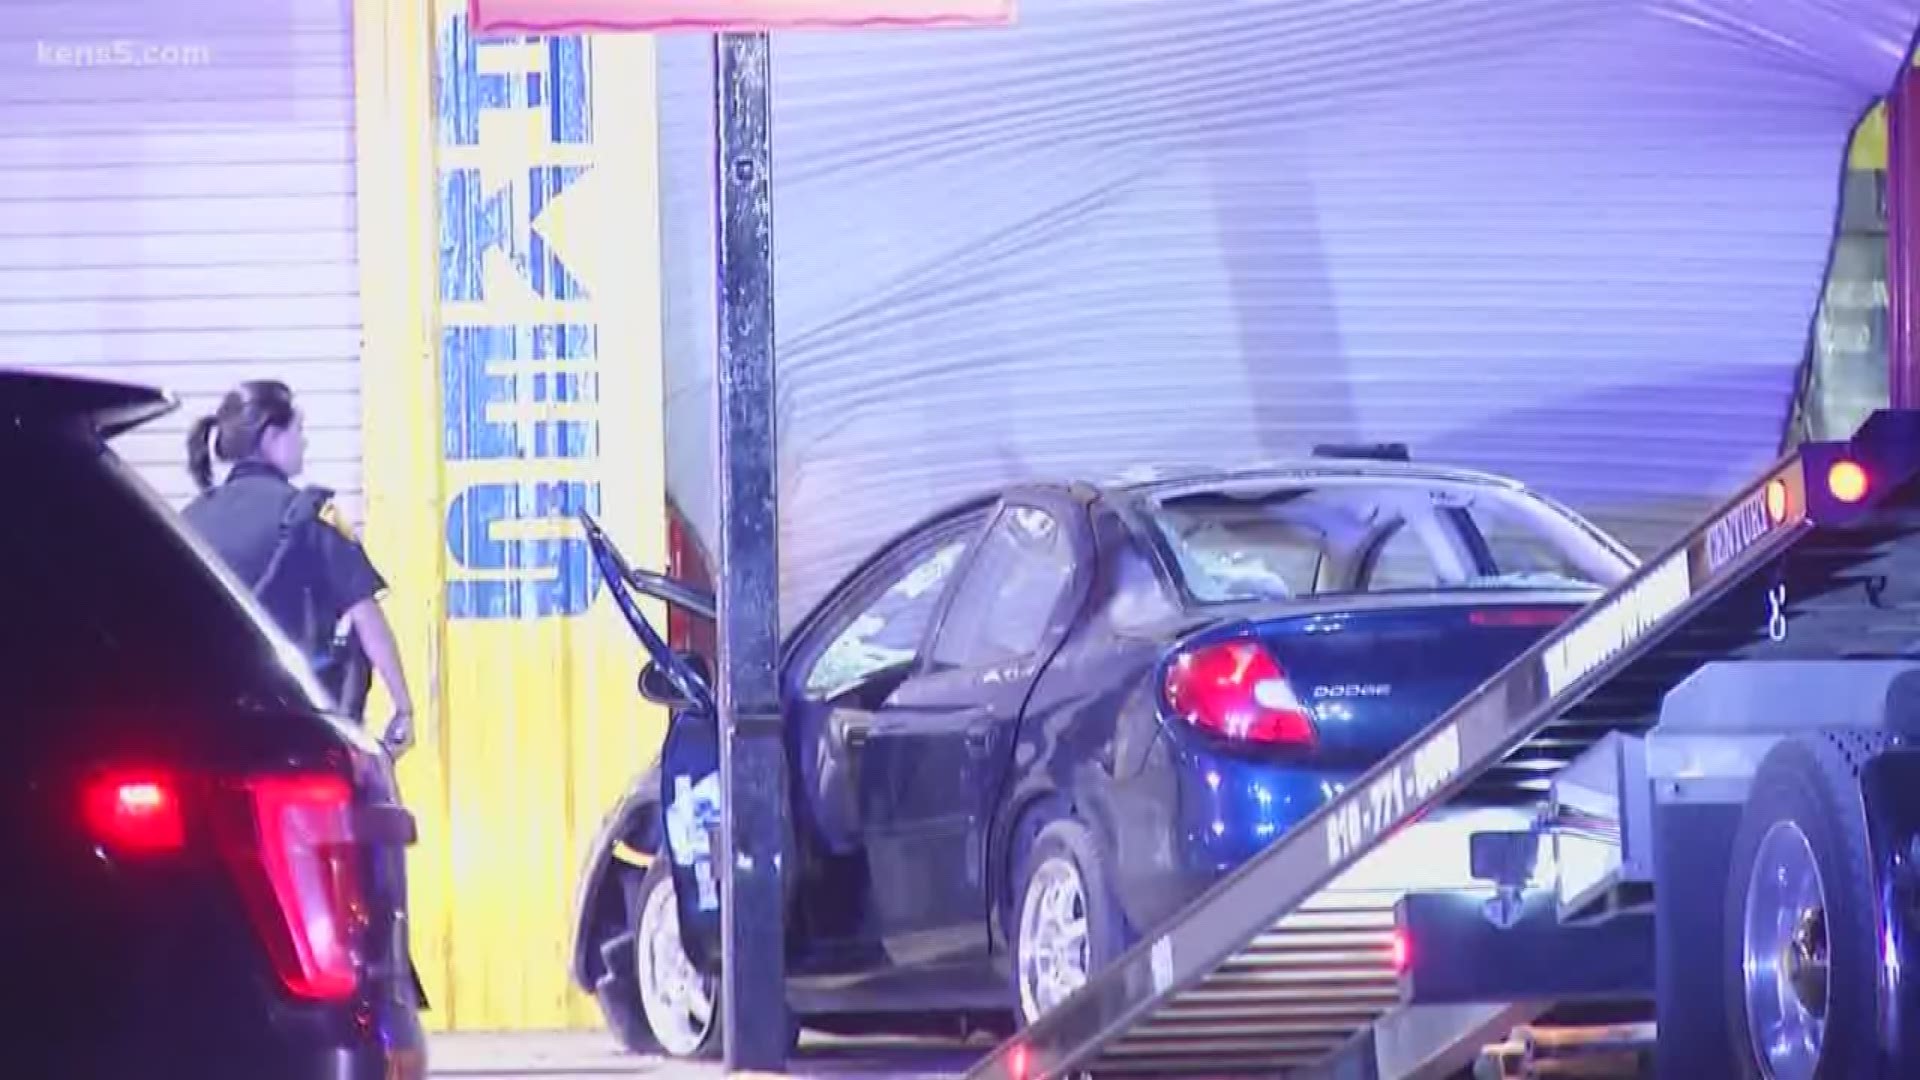 The man driving lost control of the car and crashed into an auto shop on Pleasanton Road near Southwest Military.